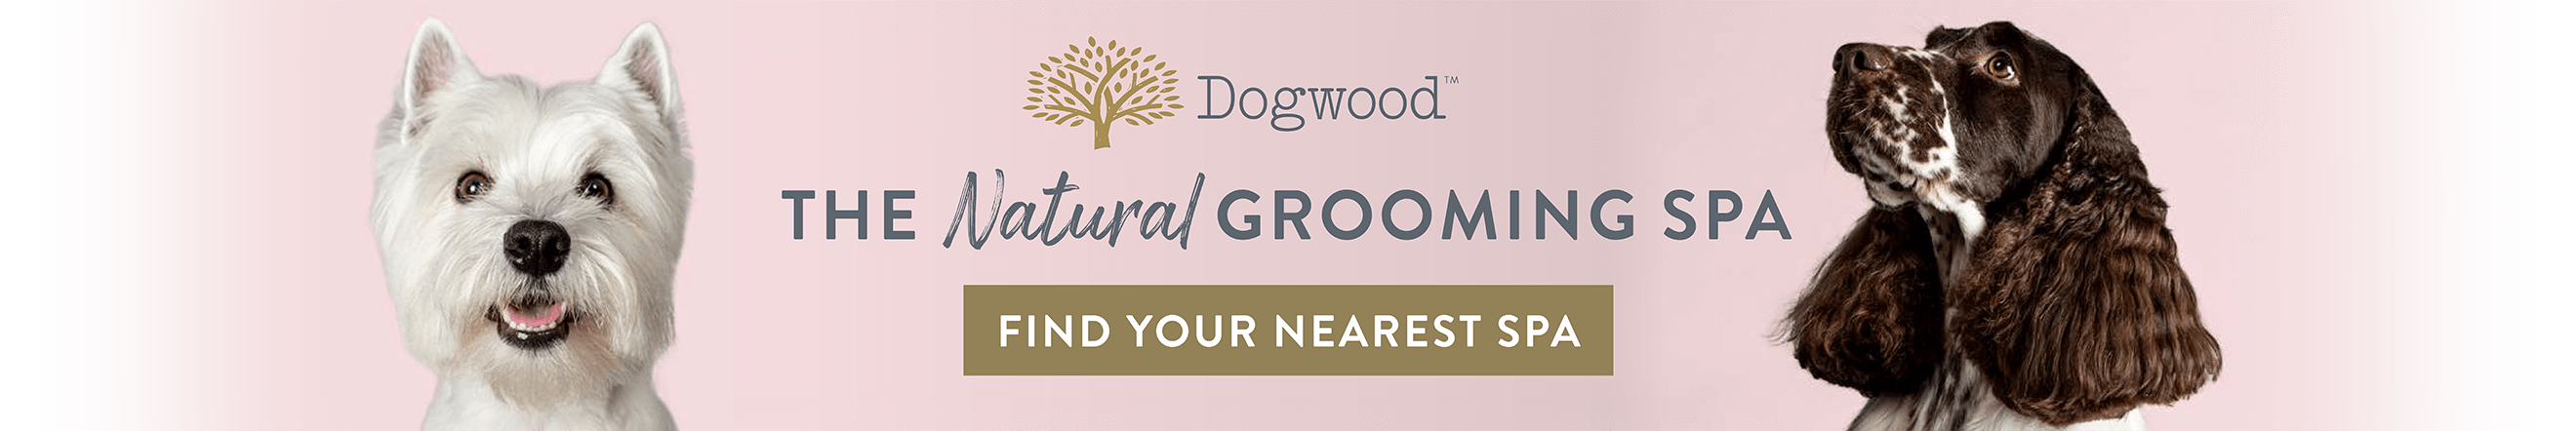 Dogwood - The natural grooming spa